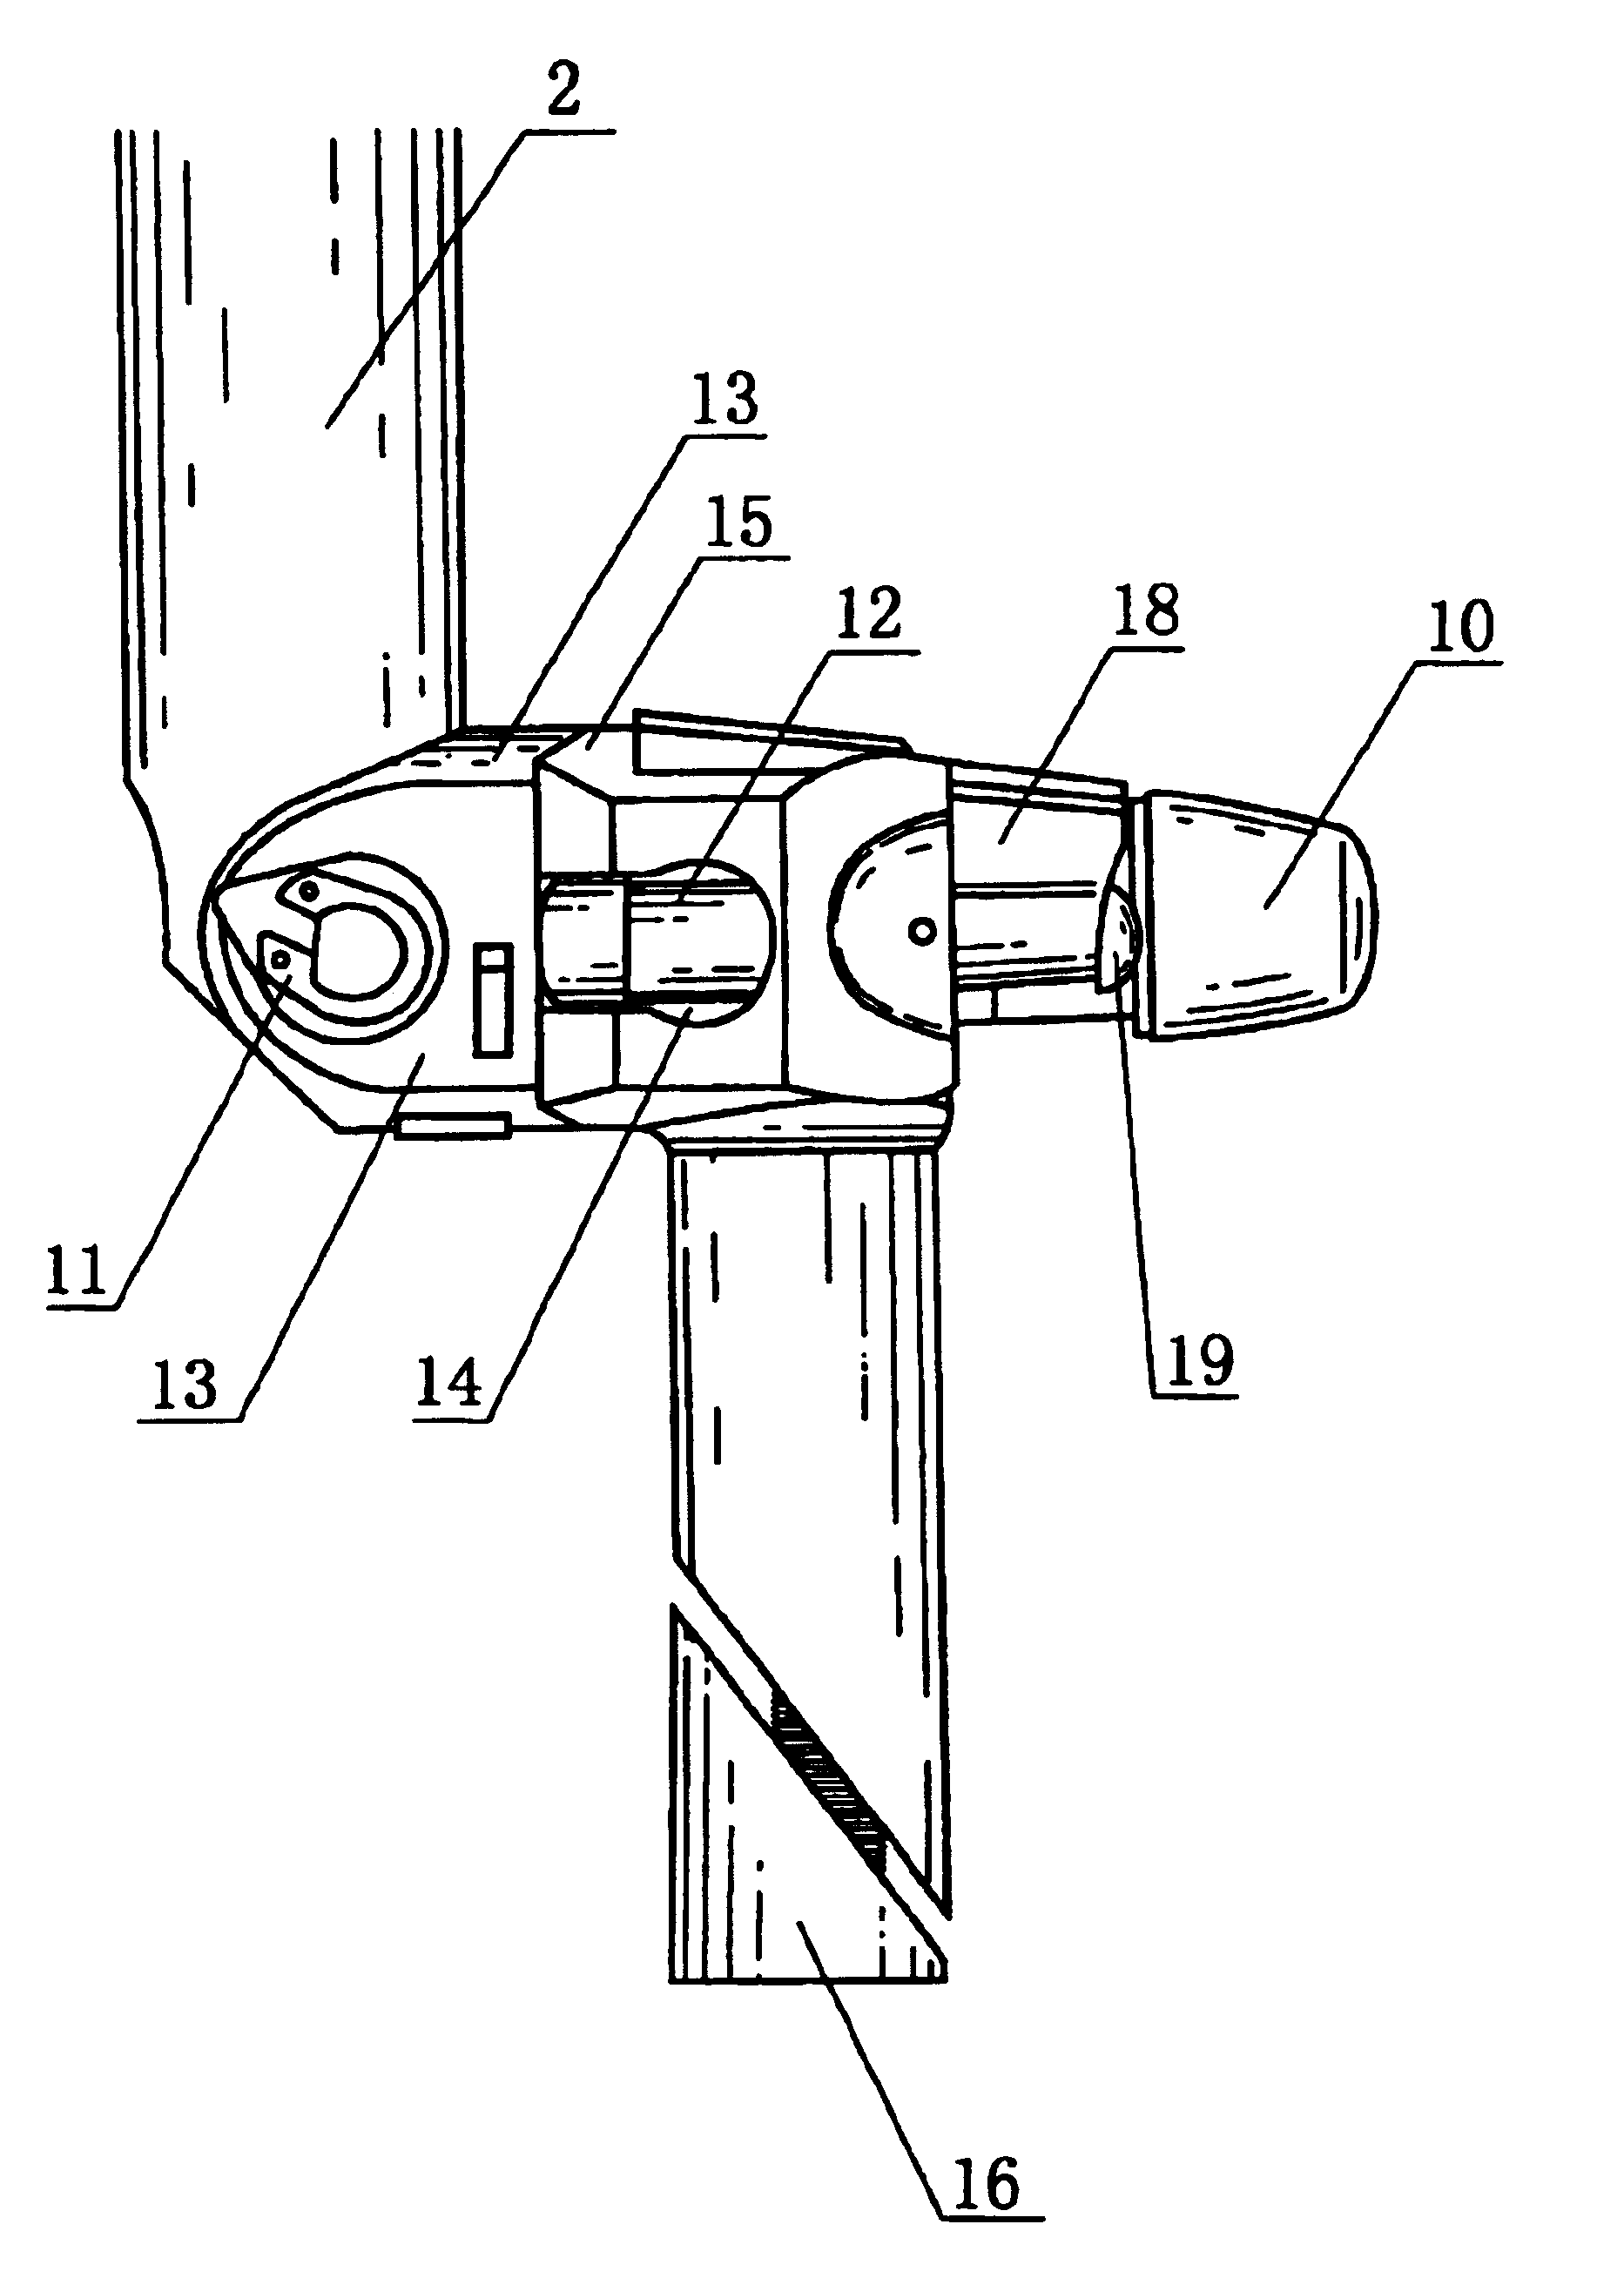 Overturning and folding device for handlebar